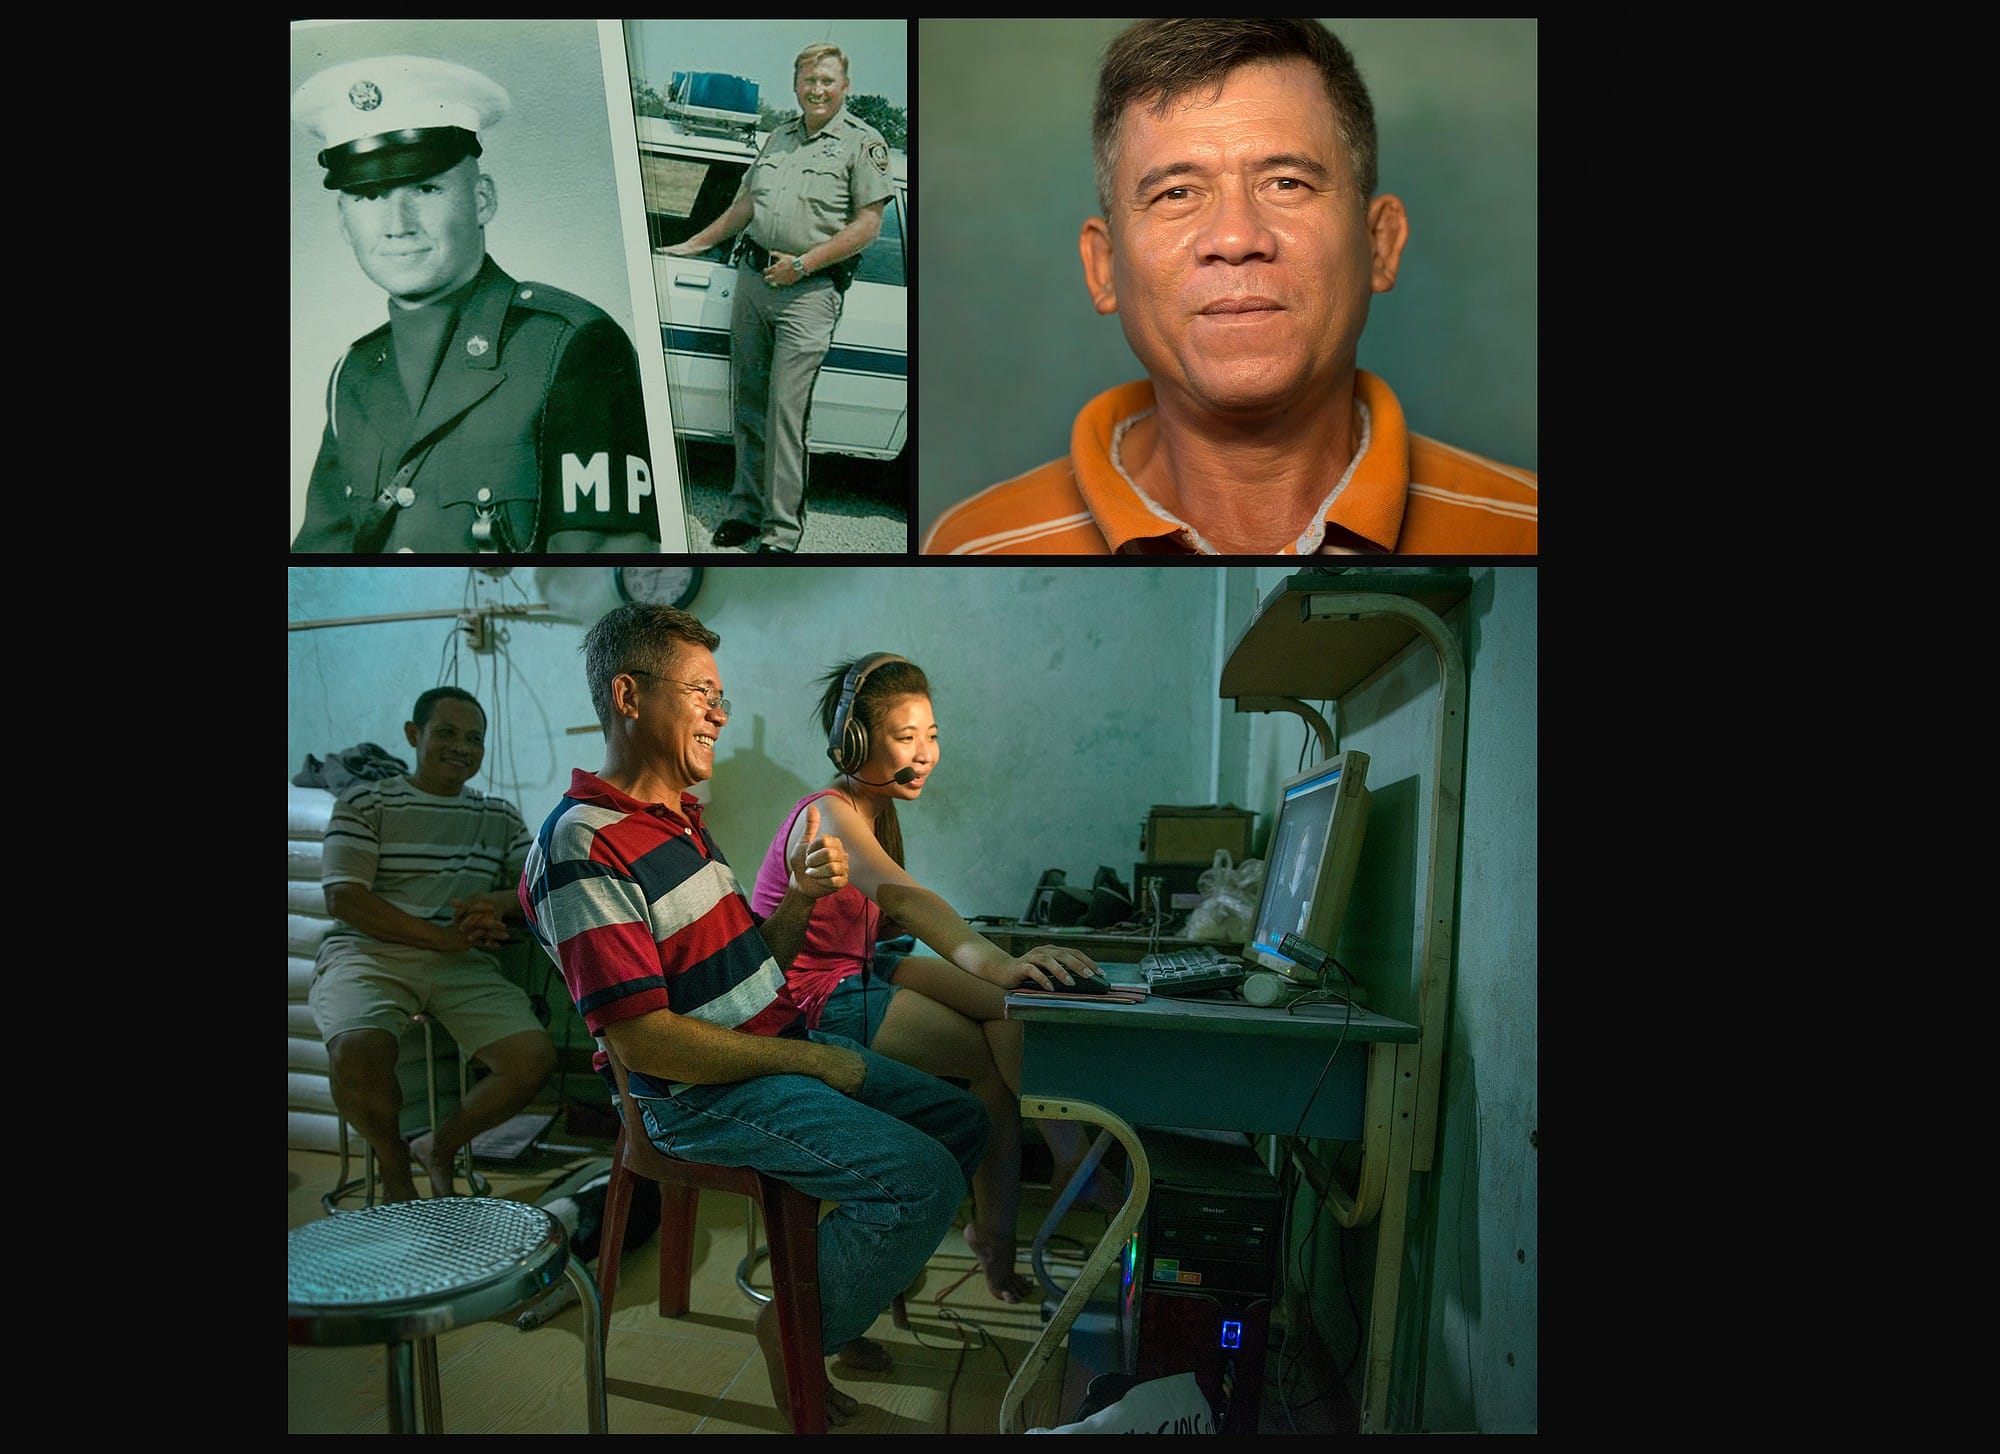 News of a DNA match between Vo Huu Nhan, upper right, and his father, Robert Thedford Jr., a retired deputy sheriff in Texas, set in motion a complex chain of events. Thedford, upper left, in Army during the 1960s.